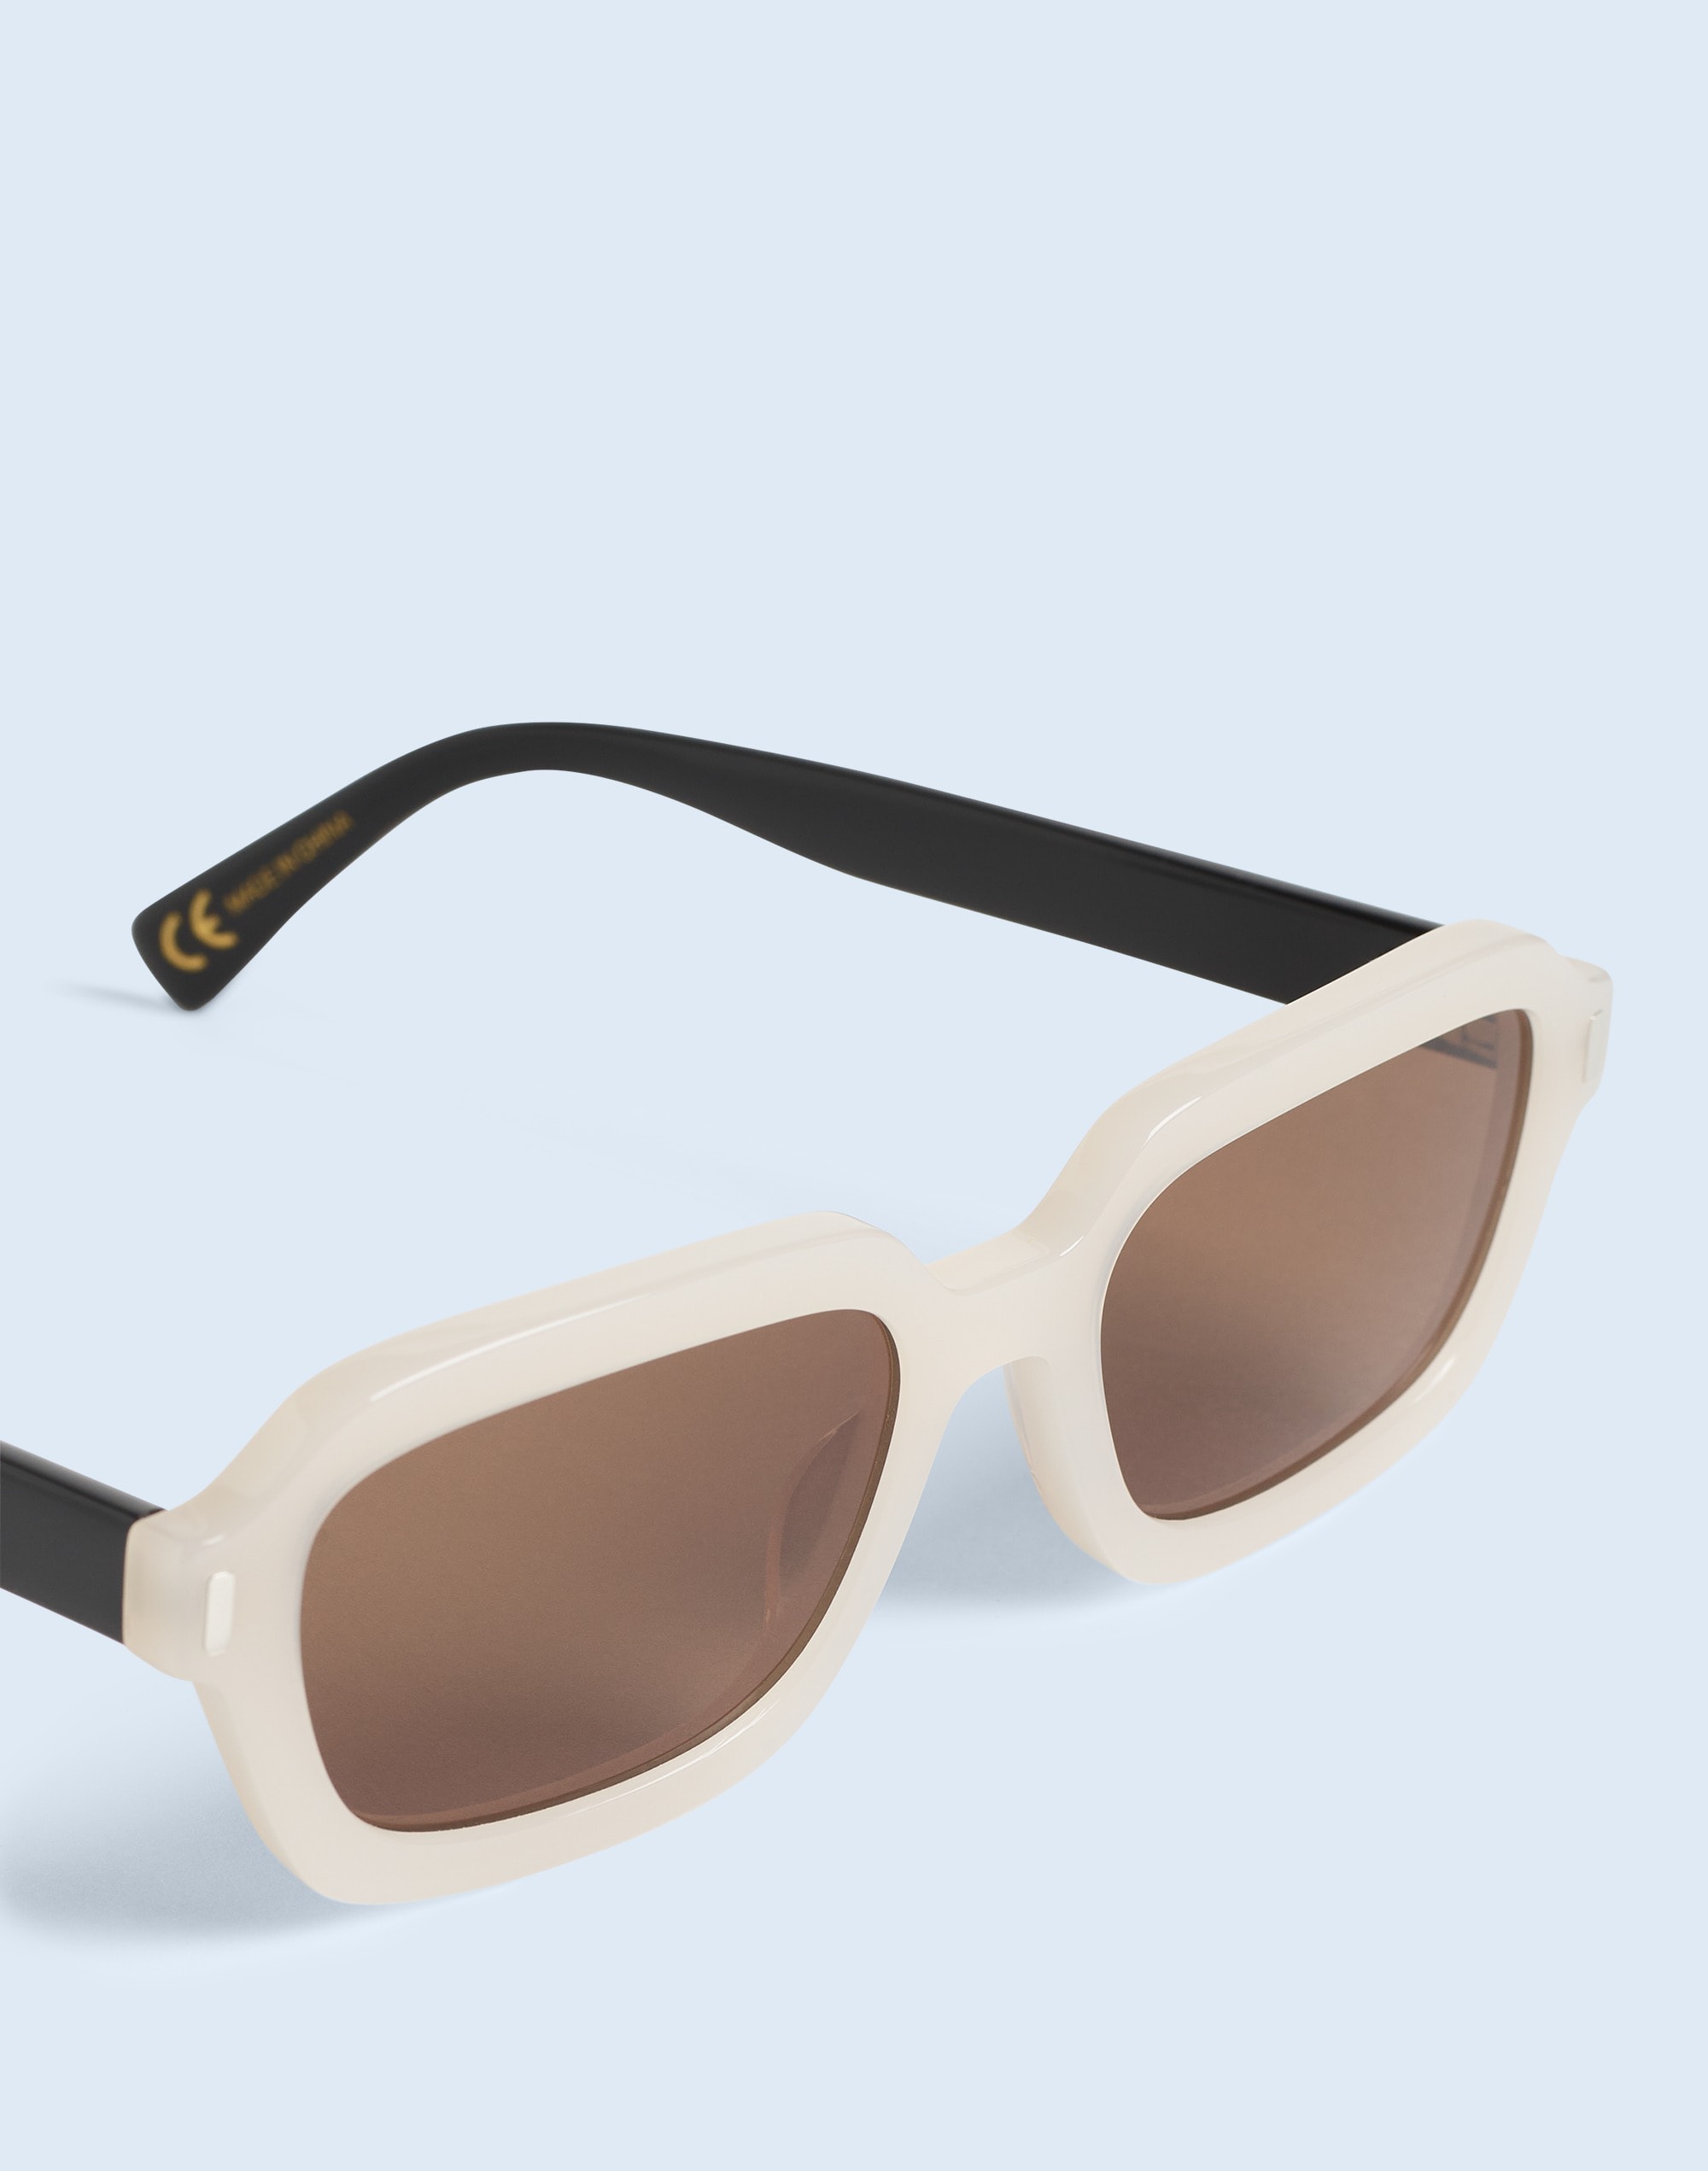 Shop Mw Rounded Rectangle Acetate Sunglasses In Milky Cloud Cream Black